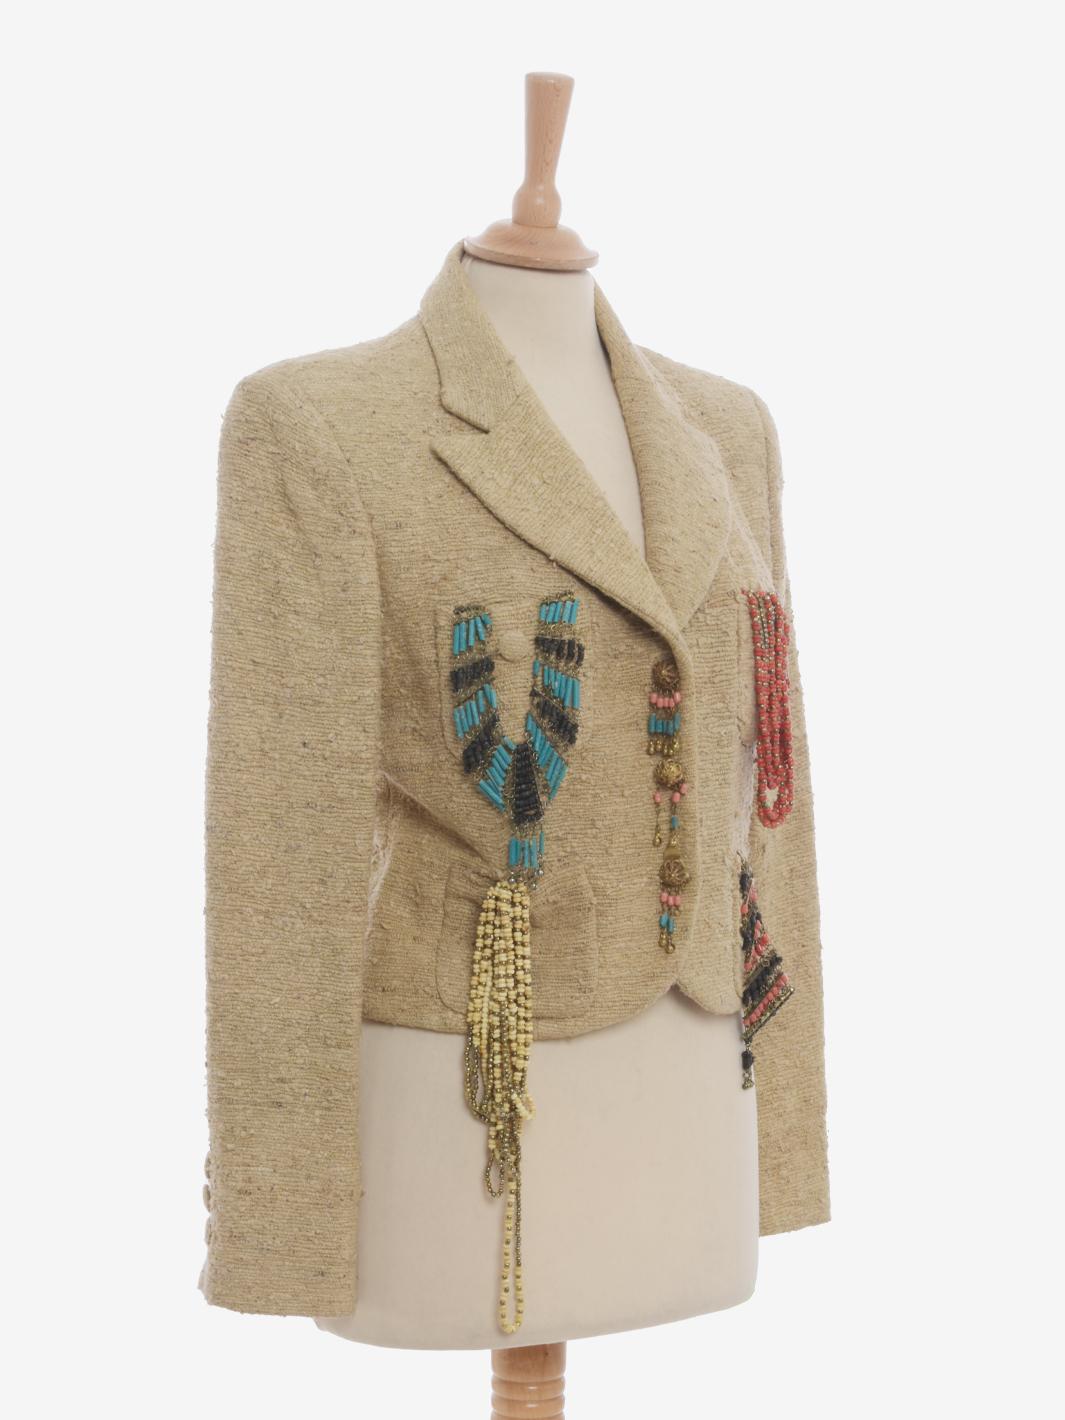 Moschino Couture Blazer With Pendants Decorations - 90s In Excellent Condition For Sale In Milano, IT